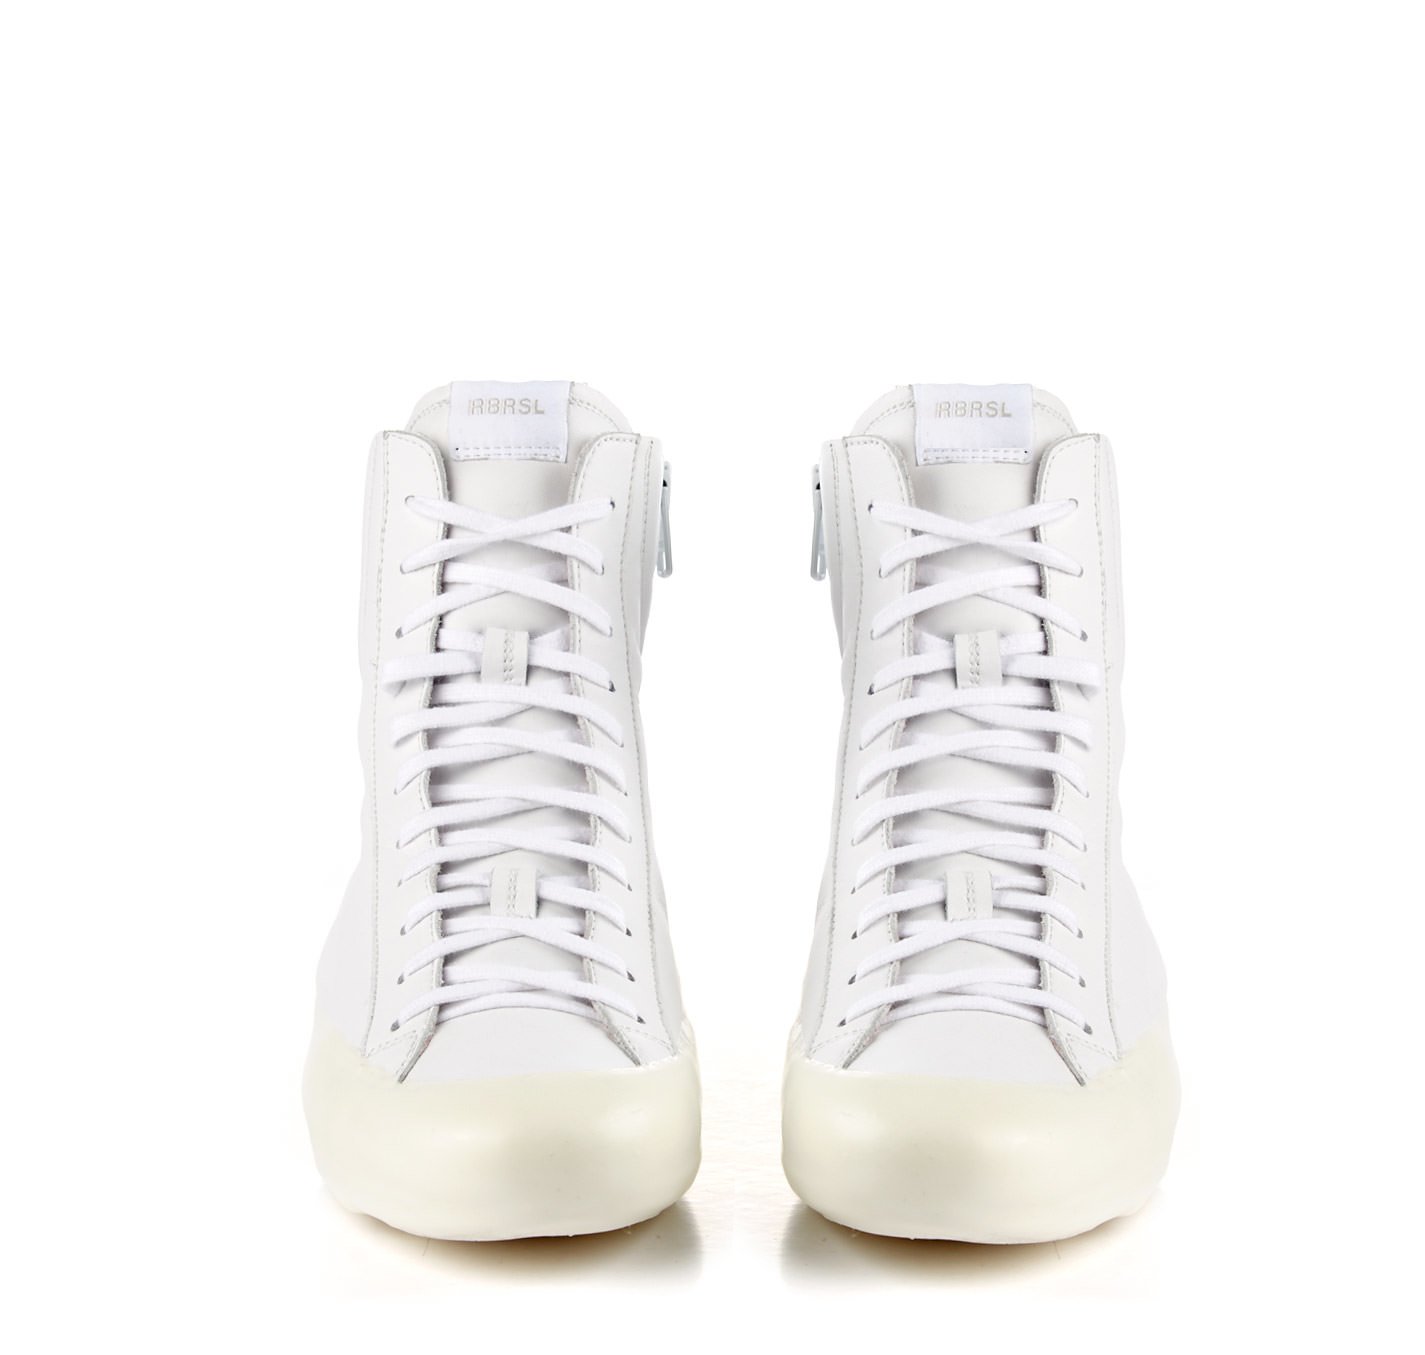 RBRSL Rubber Soul -Man -RBRSL classic white ankle boots with inner zip